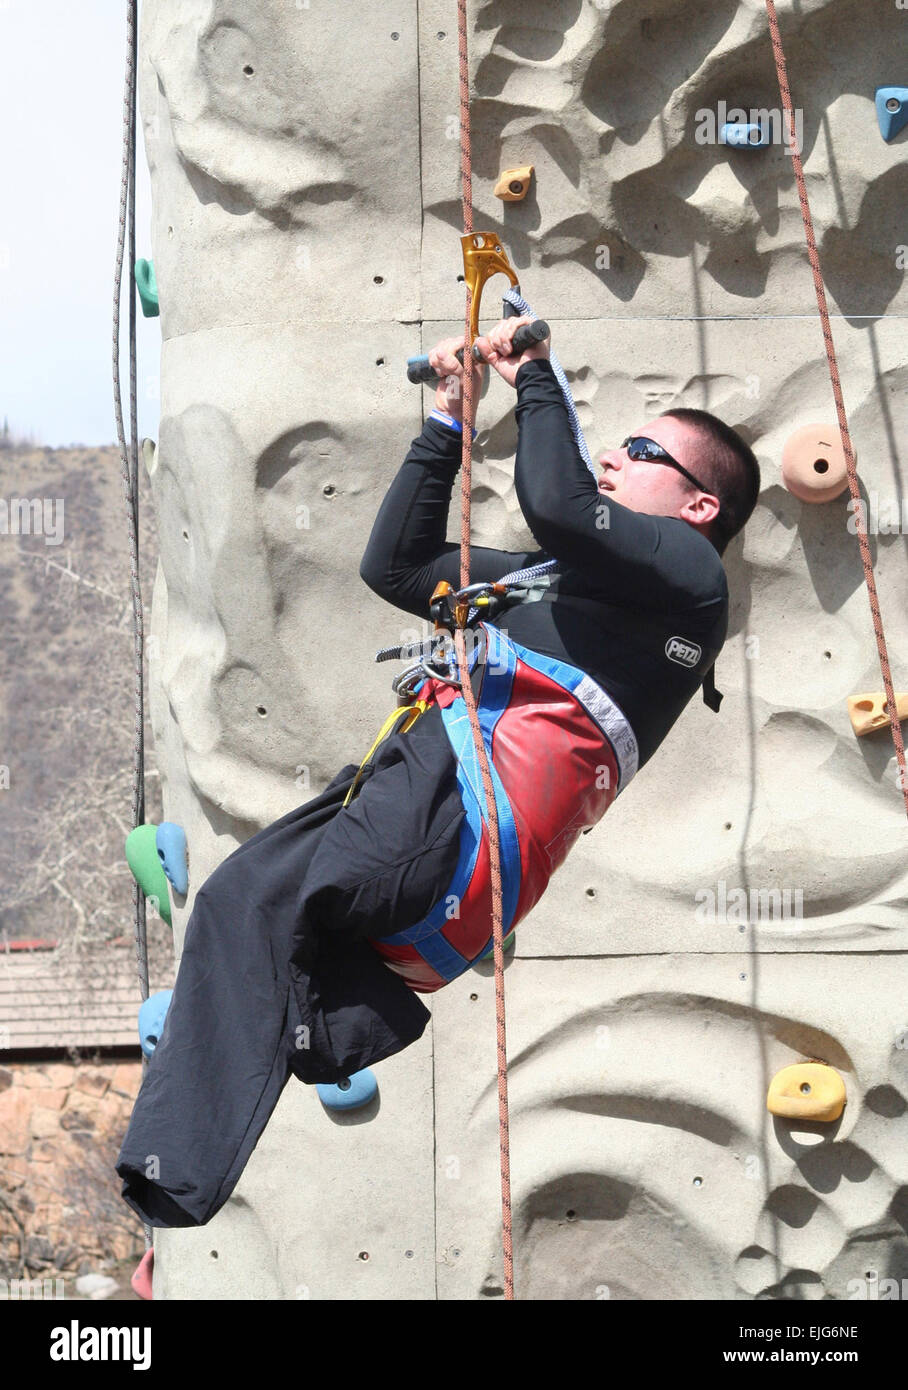 Army Cpl. Shane Parsons, a 4th Infantry Division soldier who lost both legs and suffered a traumatic brain injury in Ramadi, Iraq, shimmies up the rock-climbing wall at the National Disabled Veterans Winter Sports Clinic in Snowmass Village, Colo.  John Buehler Stock Photo